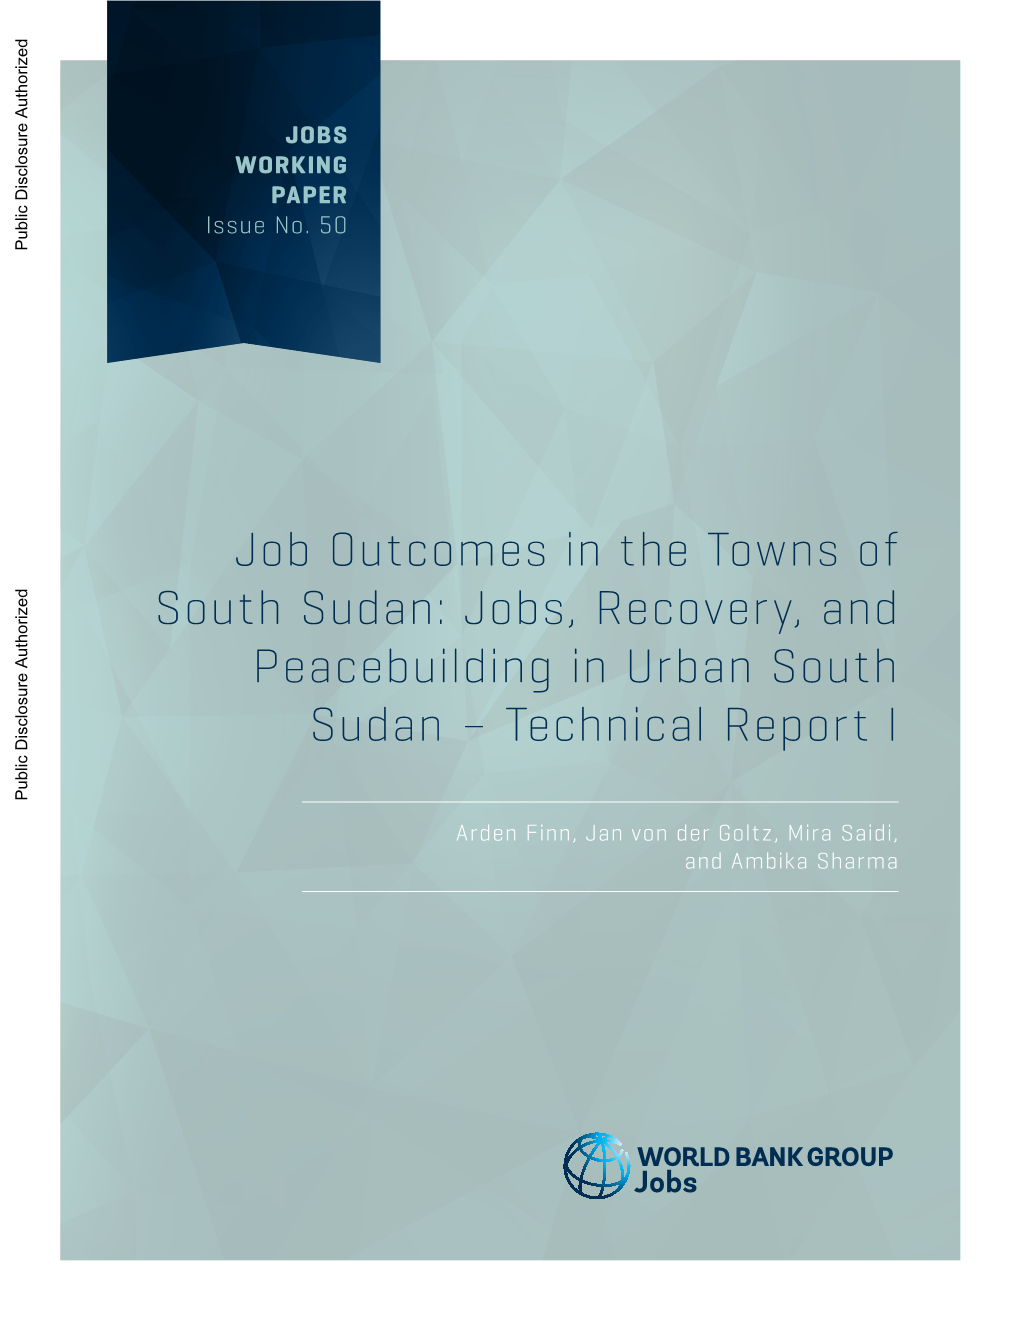 Jobs, Recovery, and Peacebuilding in Urban South Sudan